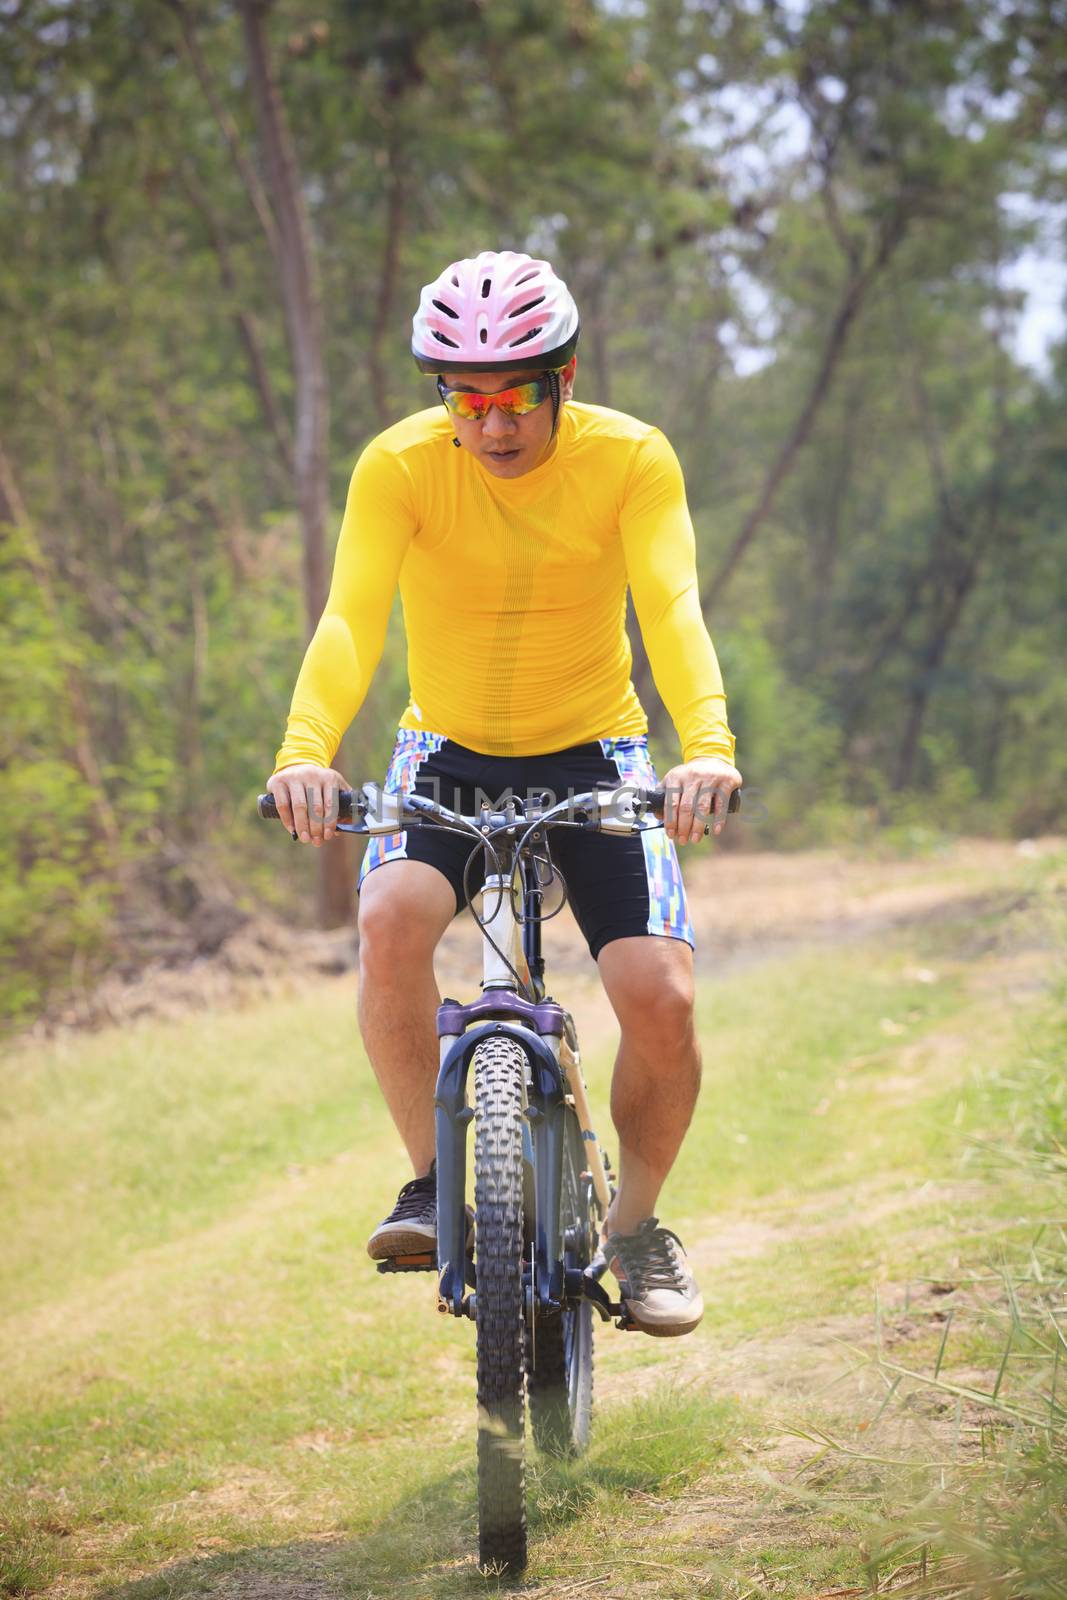 man and mountain bike riding in jungle track use for bicycle spo by khunaspix